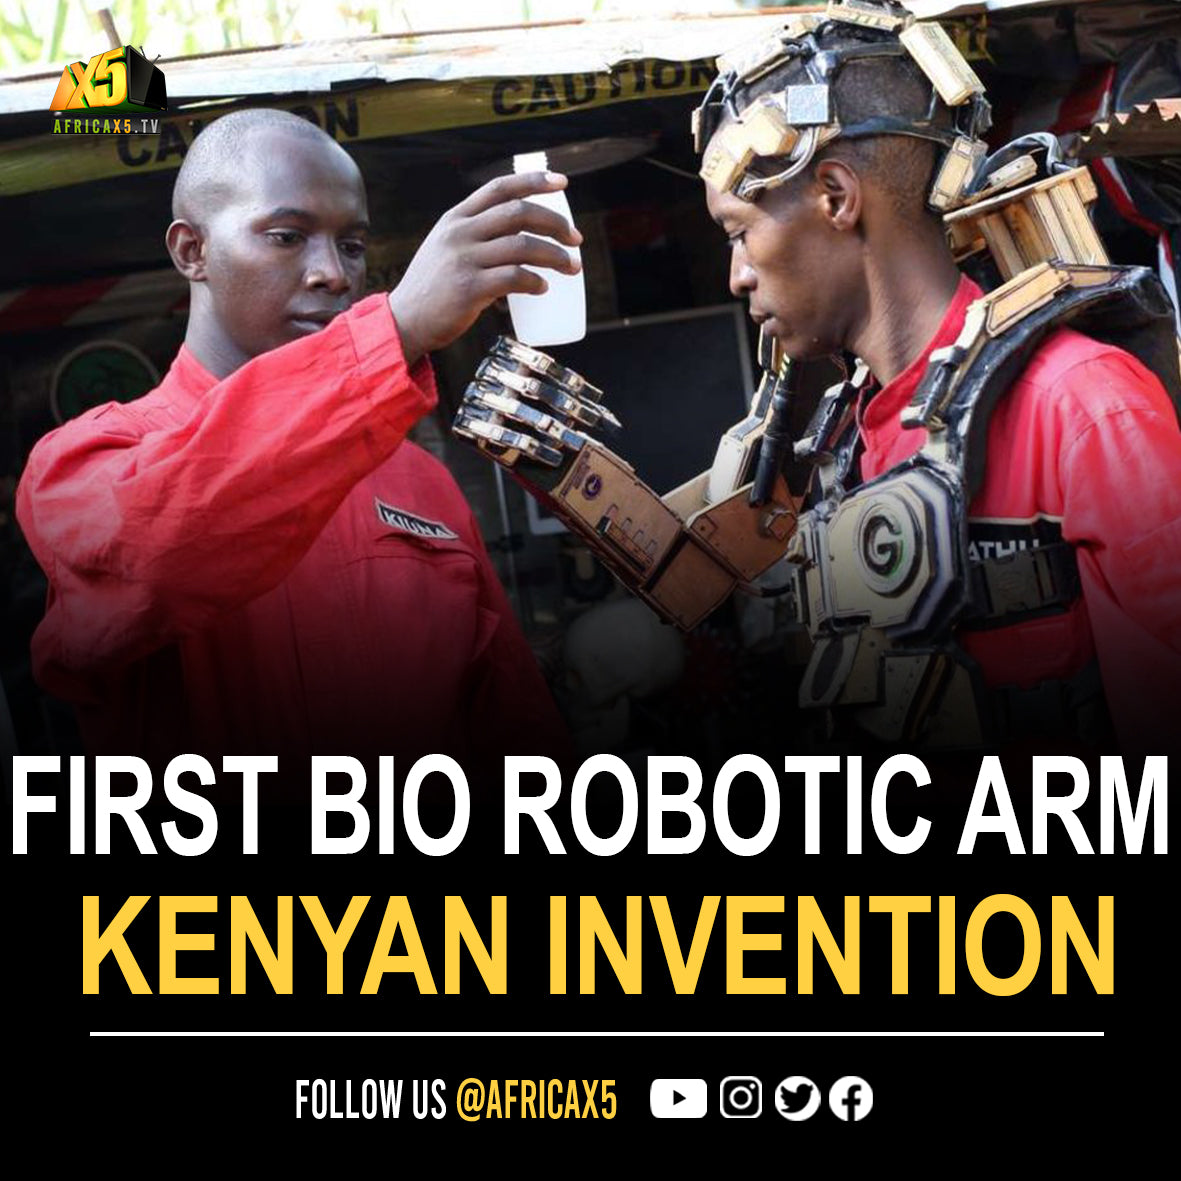 Two Kenyan Inventors Have Created The World’s First Bio-Robotic Arm Operated By Brain Signals